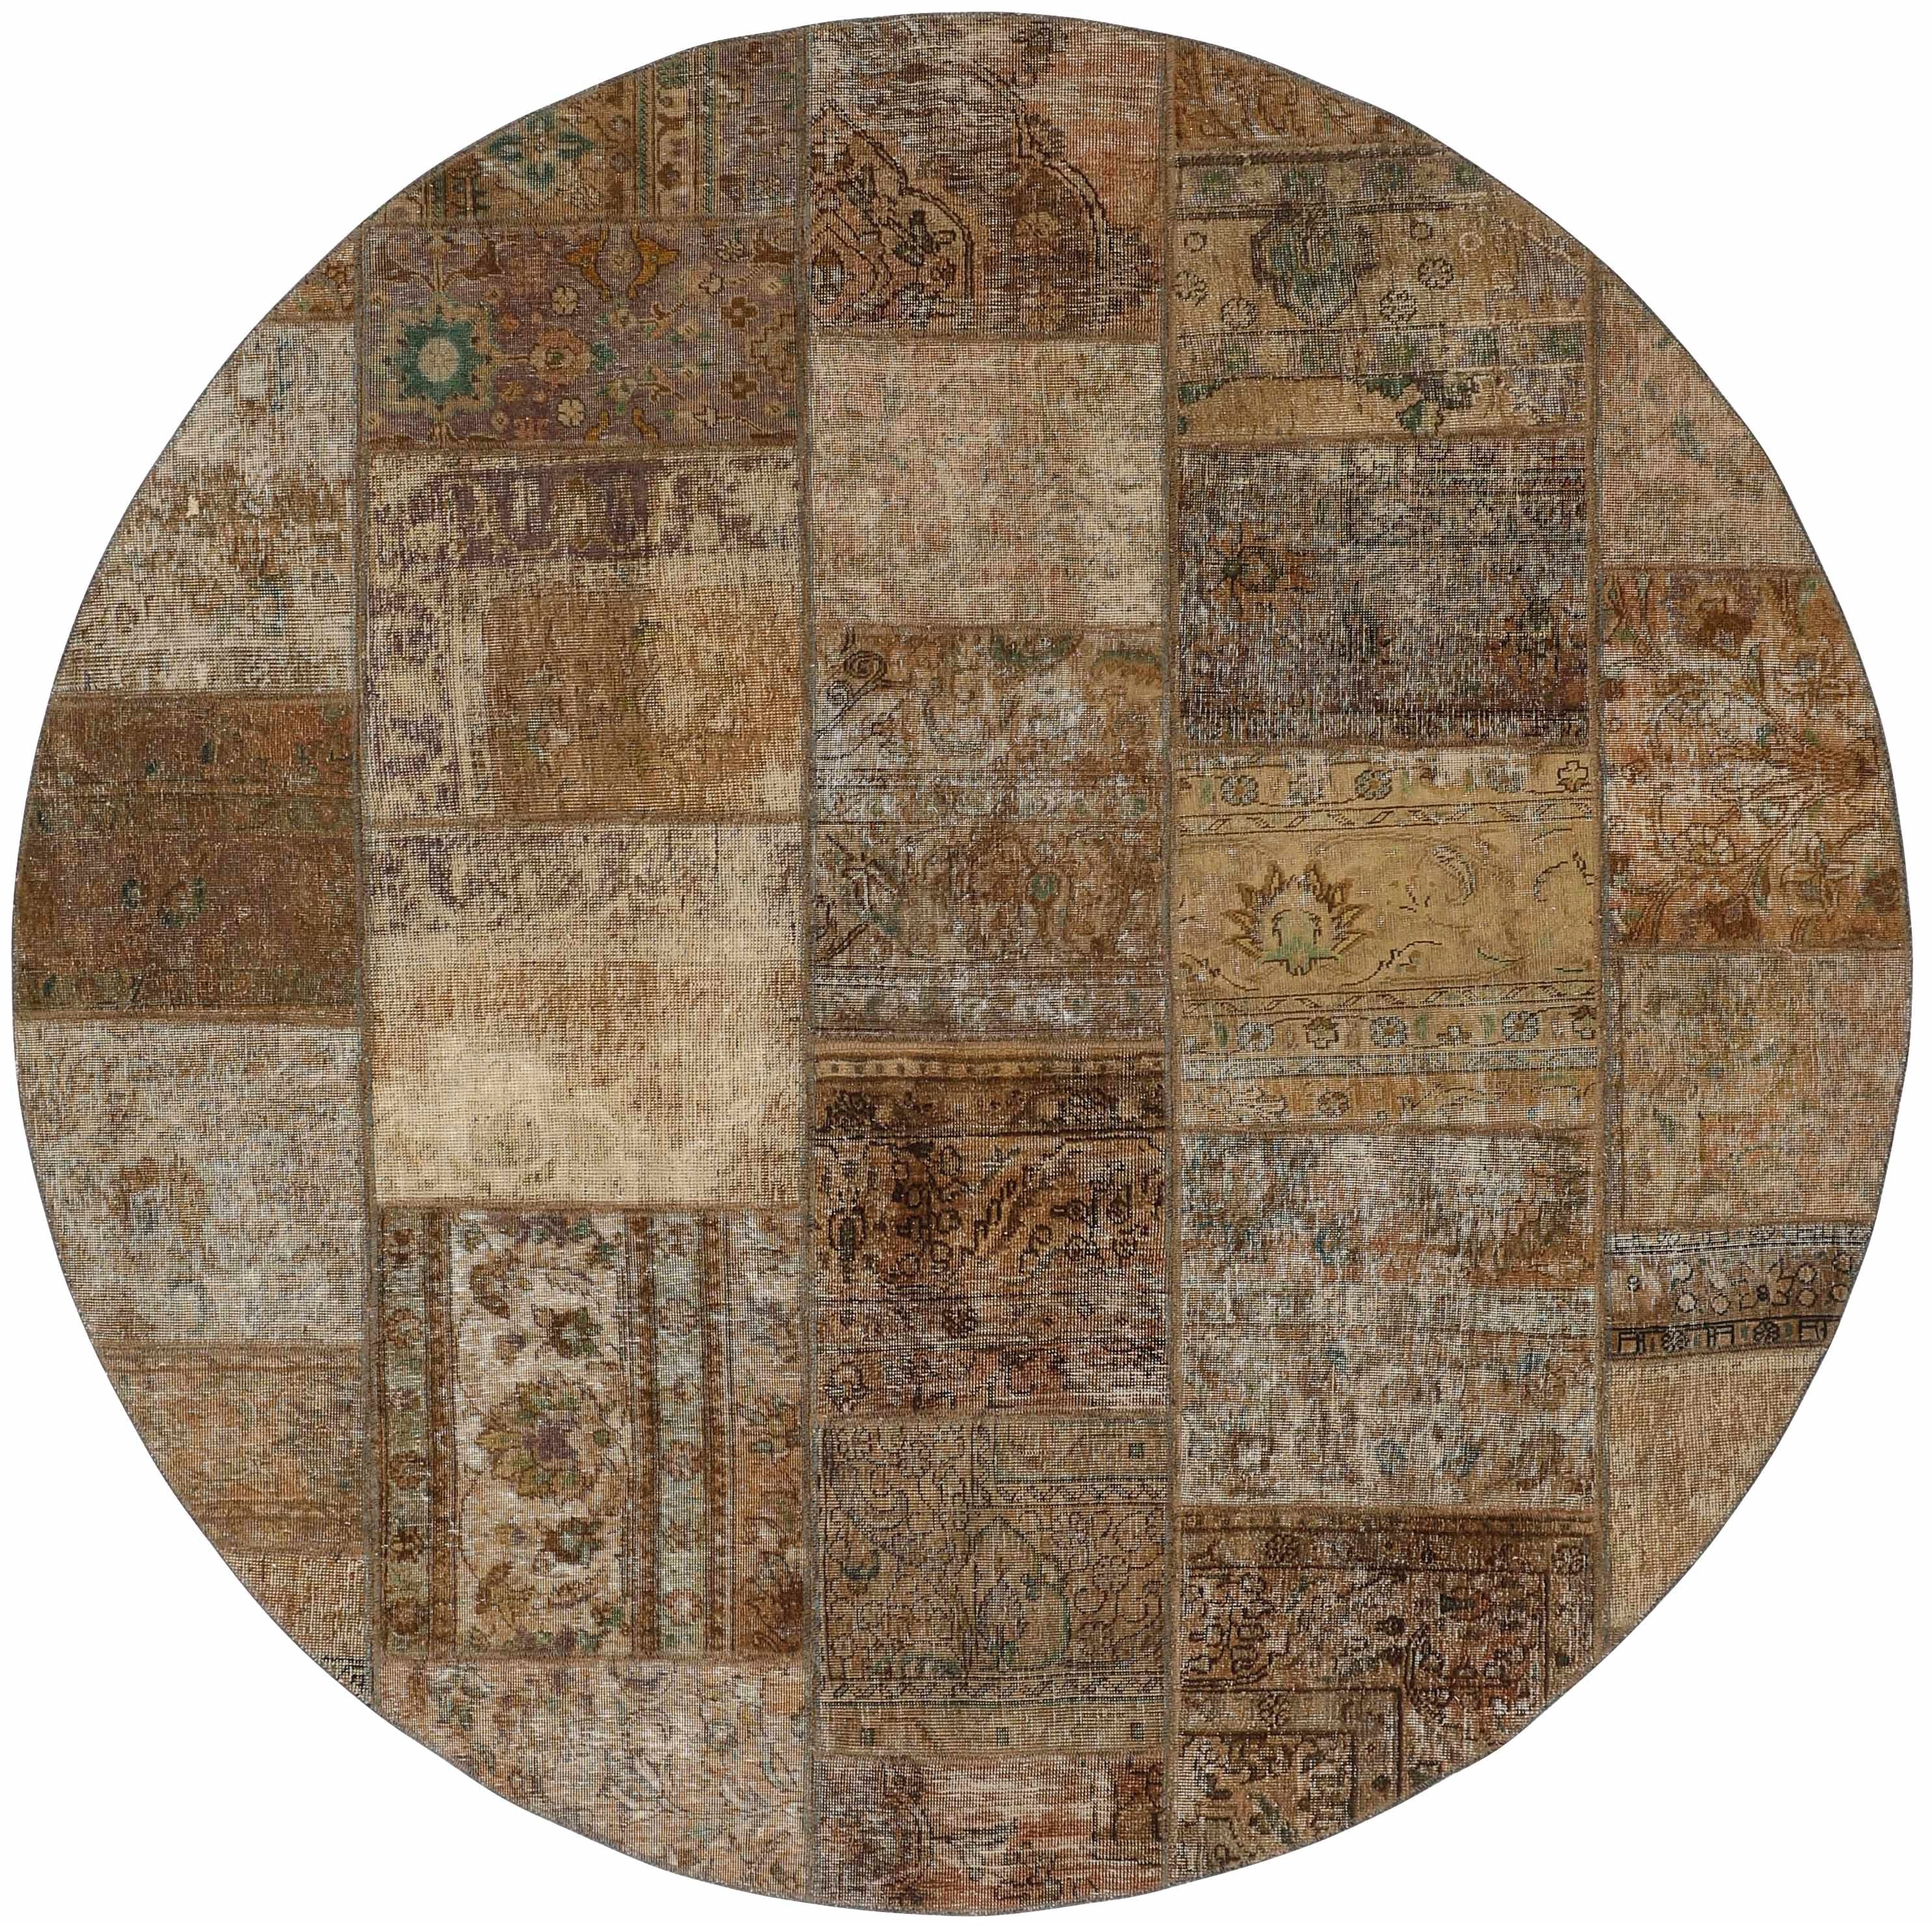 Authentic brown patchwork persian circle rug